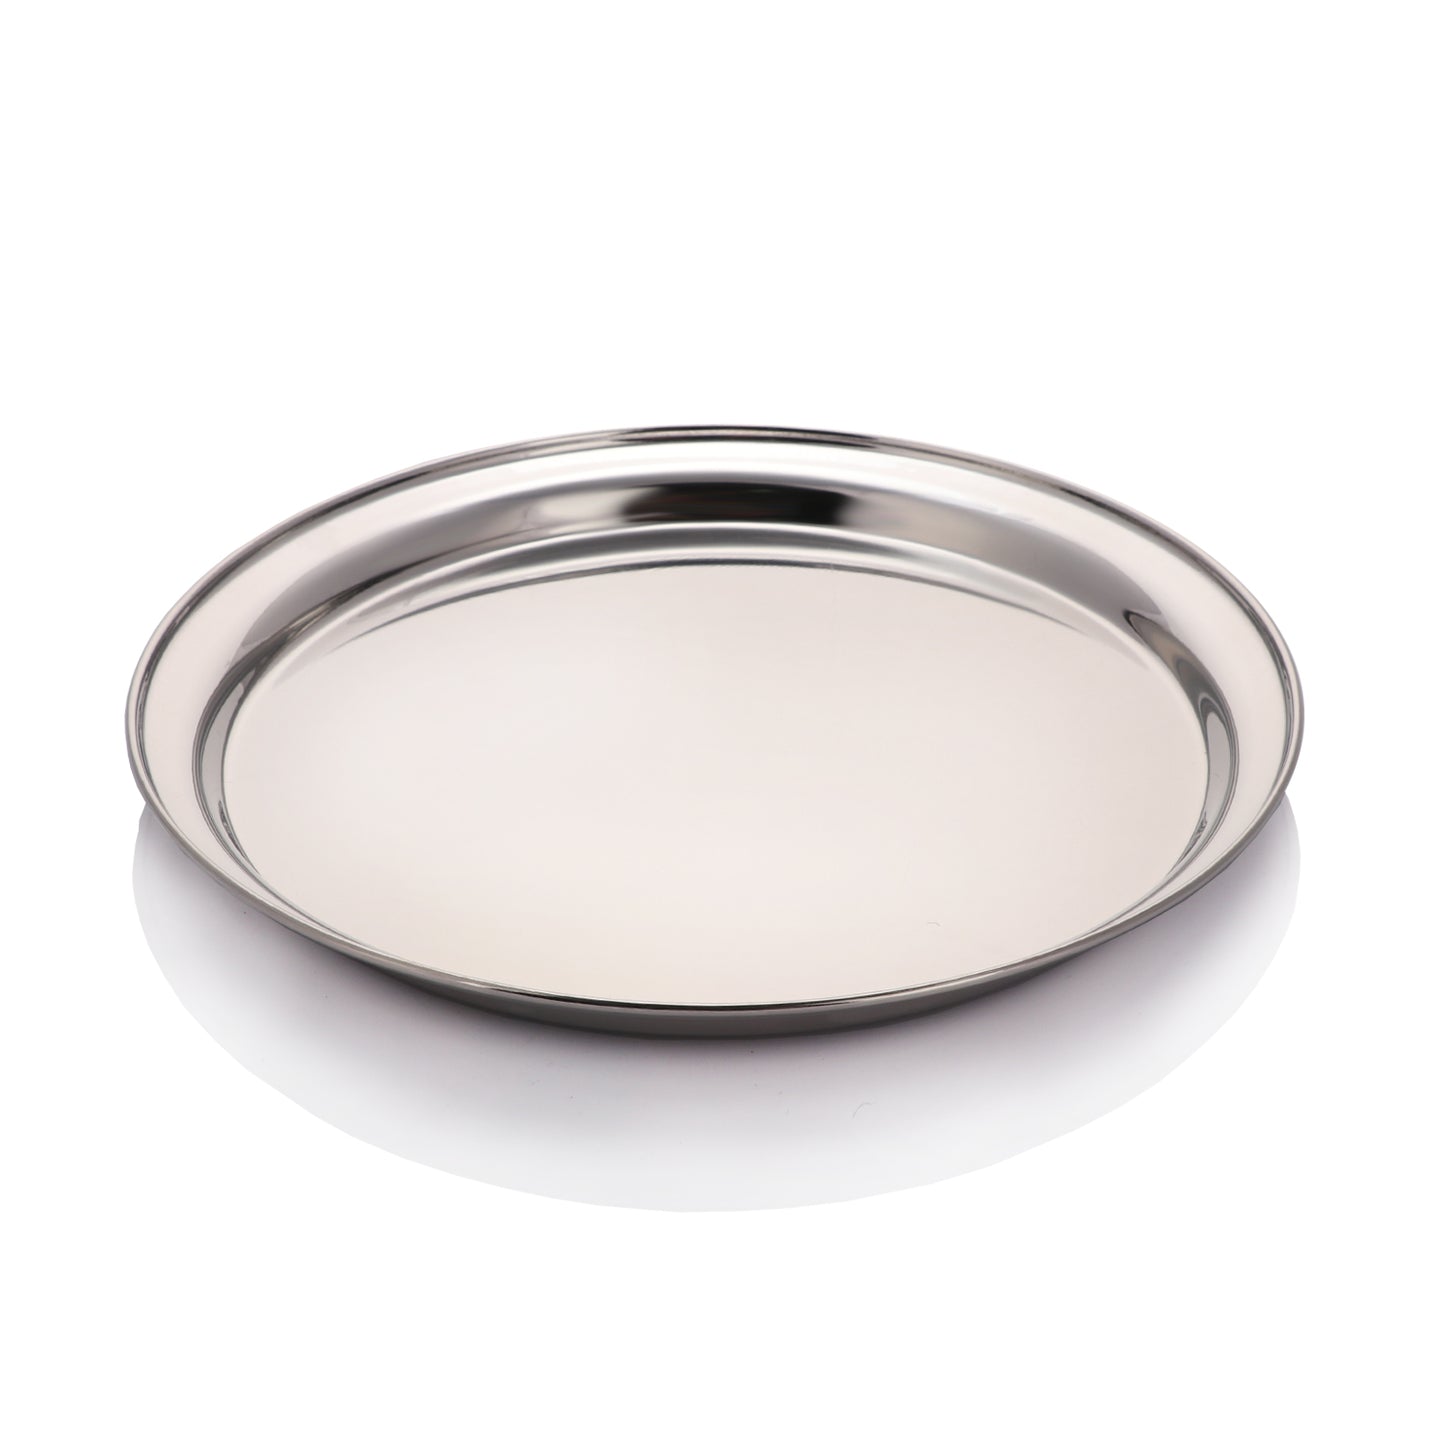 30cm Round Service Tray / Bar Tray Stainless Steel